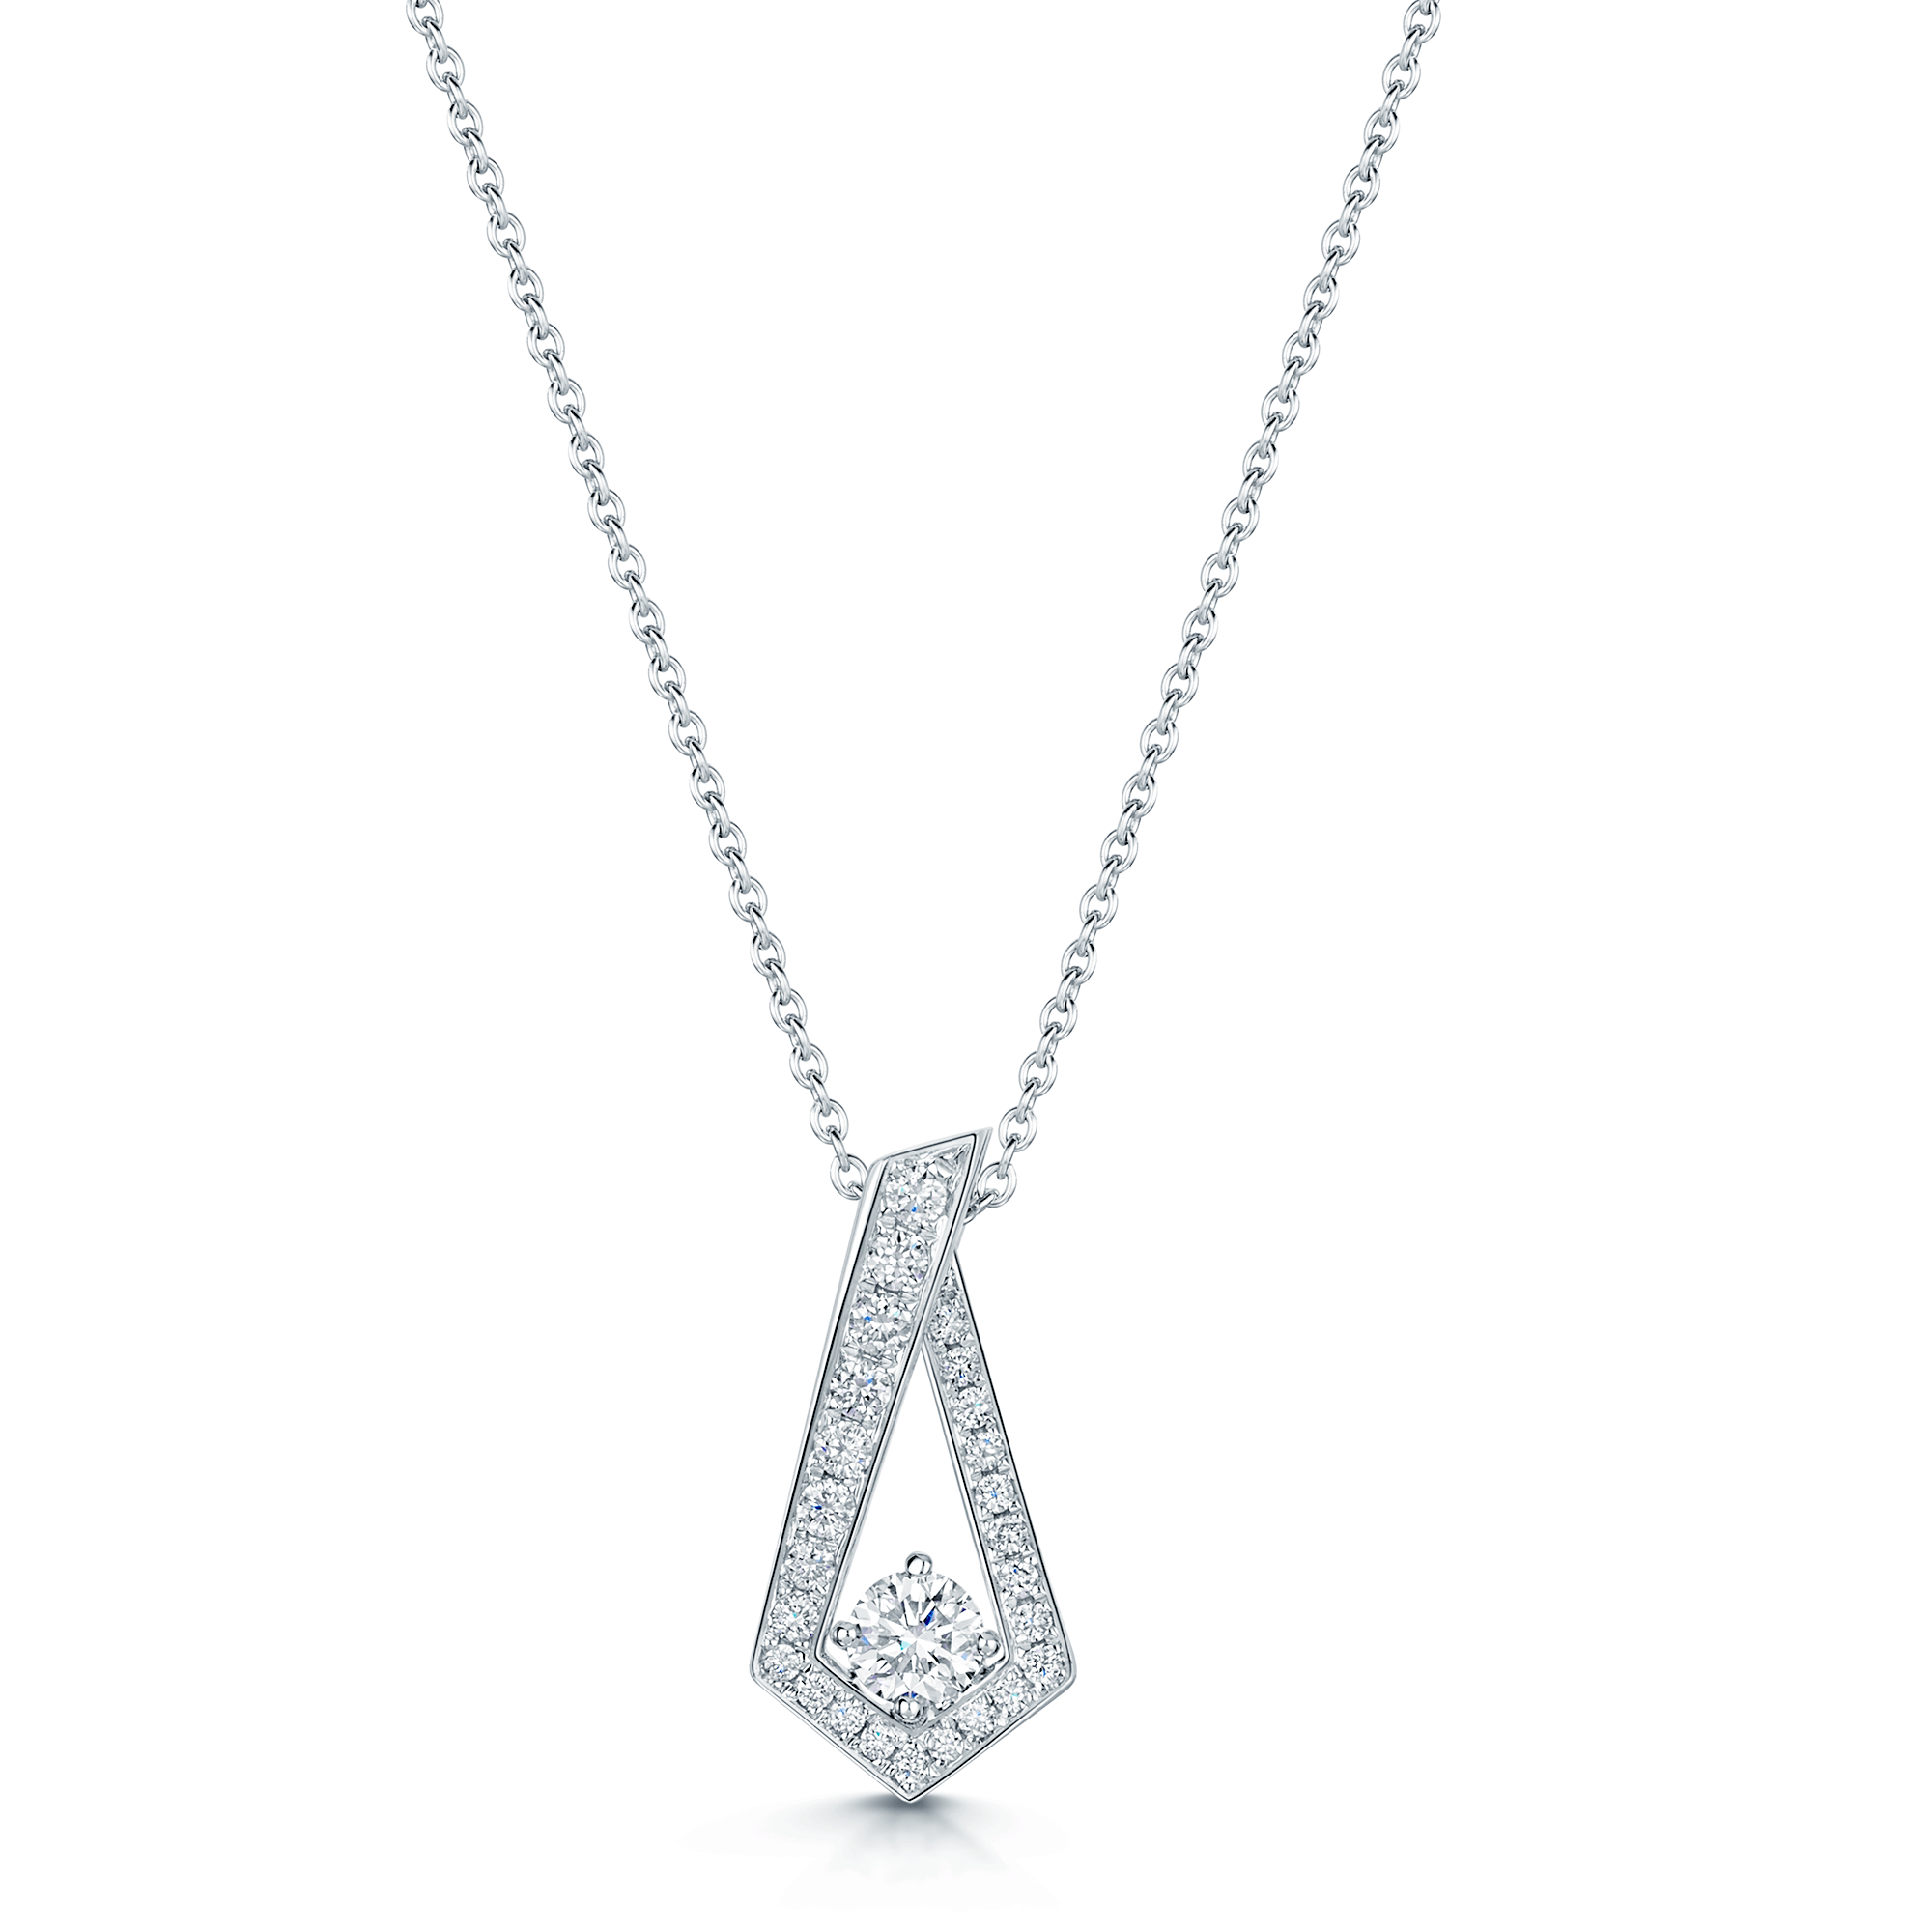 18ct White Gold Round Brilliant Cut Diamond Necklace Suspended In A Kite Shaped Halo